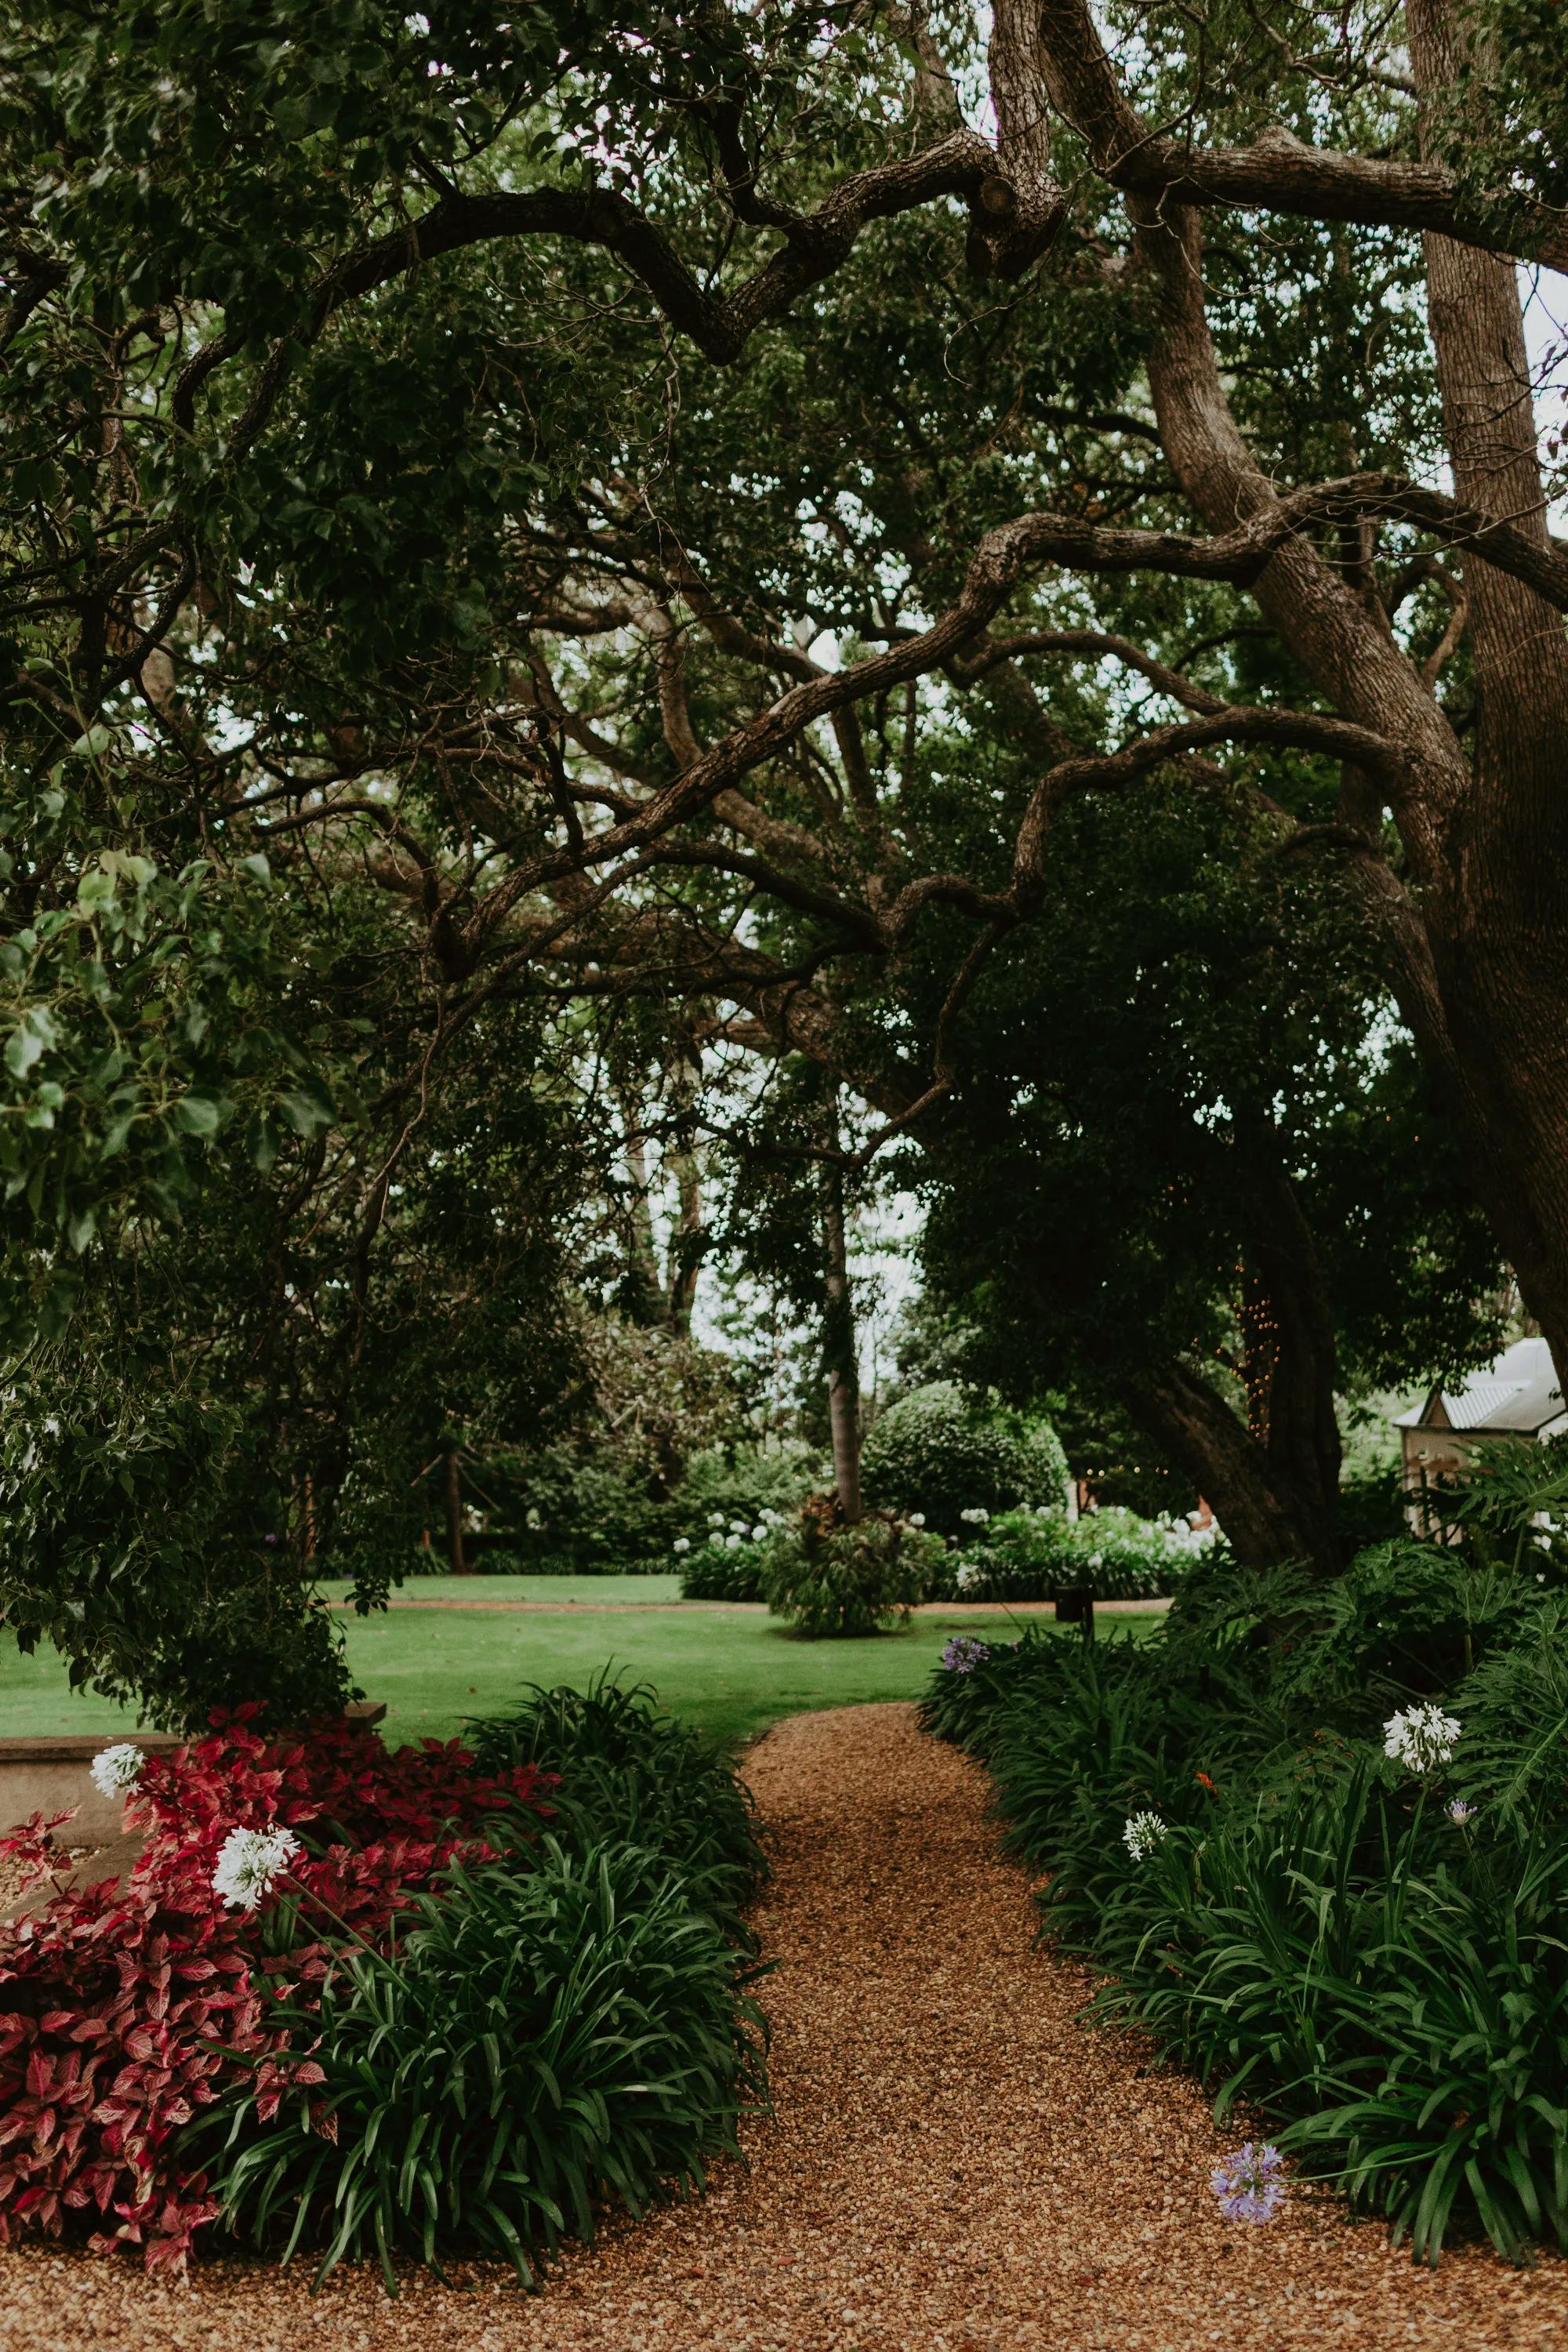 A gravel pathway winds through a lush garden with vibrant red and green foliage on either side, leading to a tranquil, shaded area beneath tall, sprawling trees. The scene is serene, with an inviting natural arch formed by the tree branches overhead.